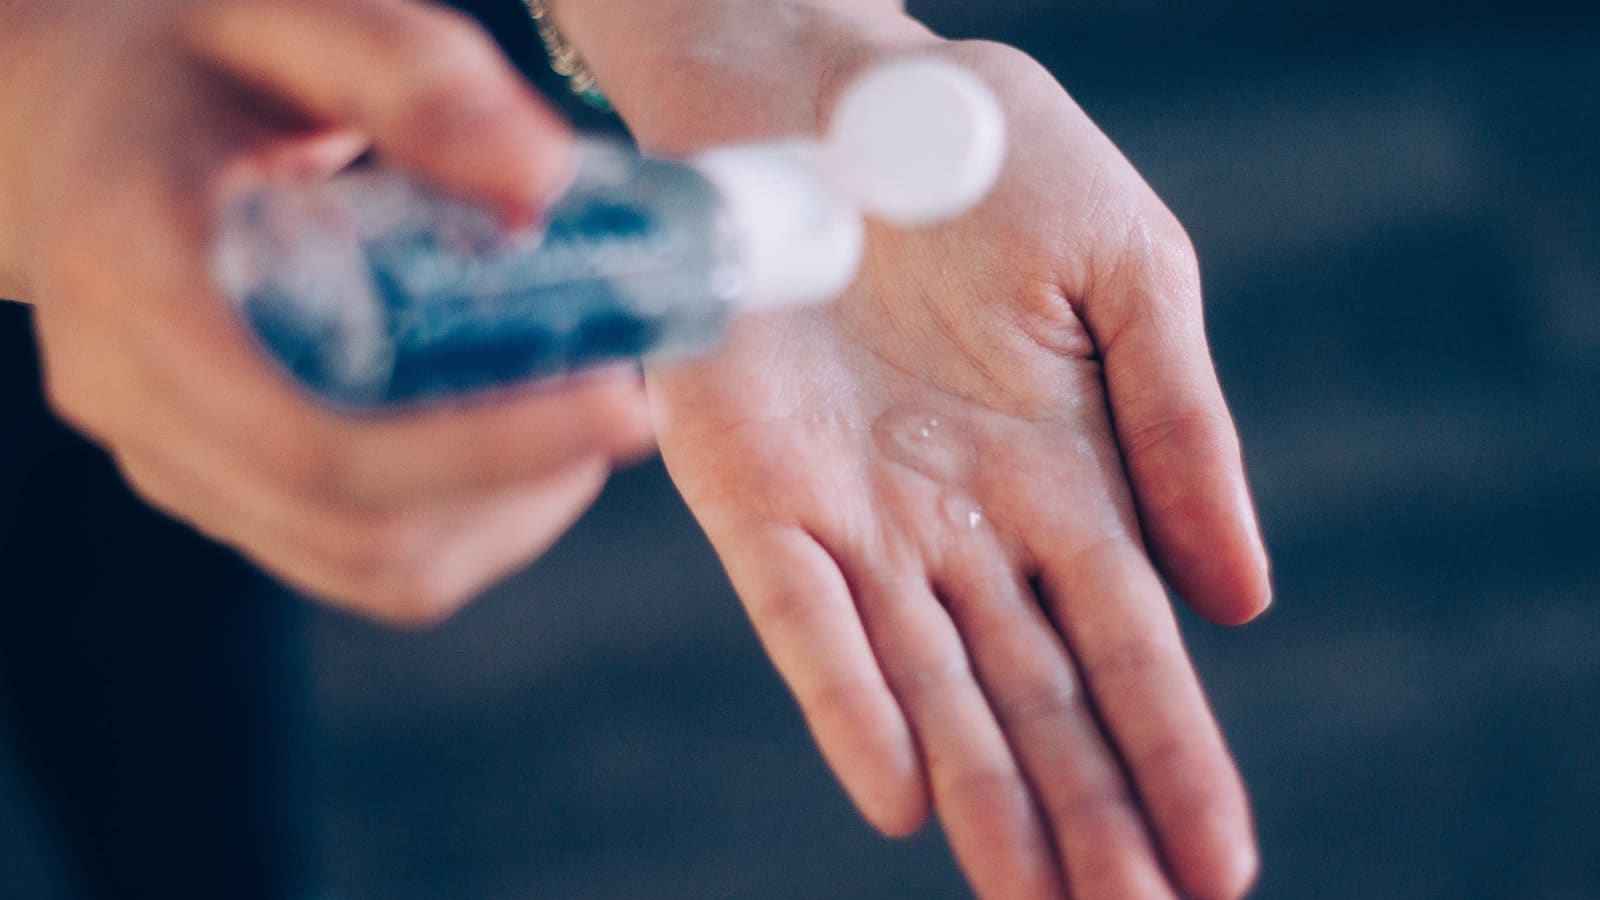 Coronavirus: The history of hand sanitizer and why it's important